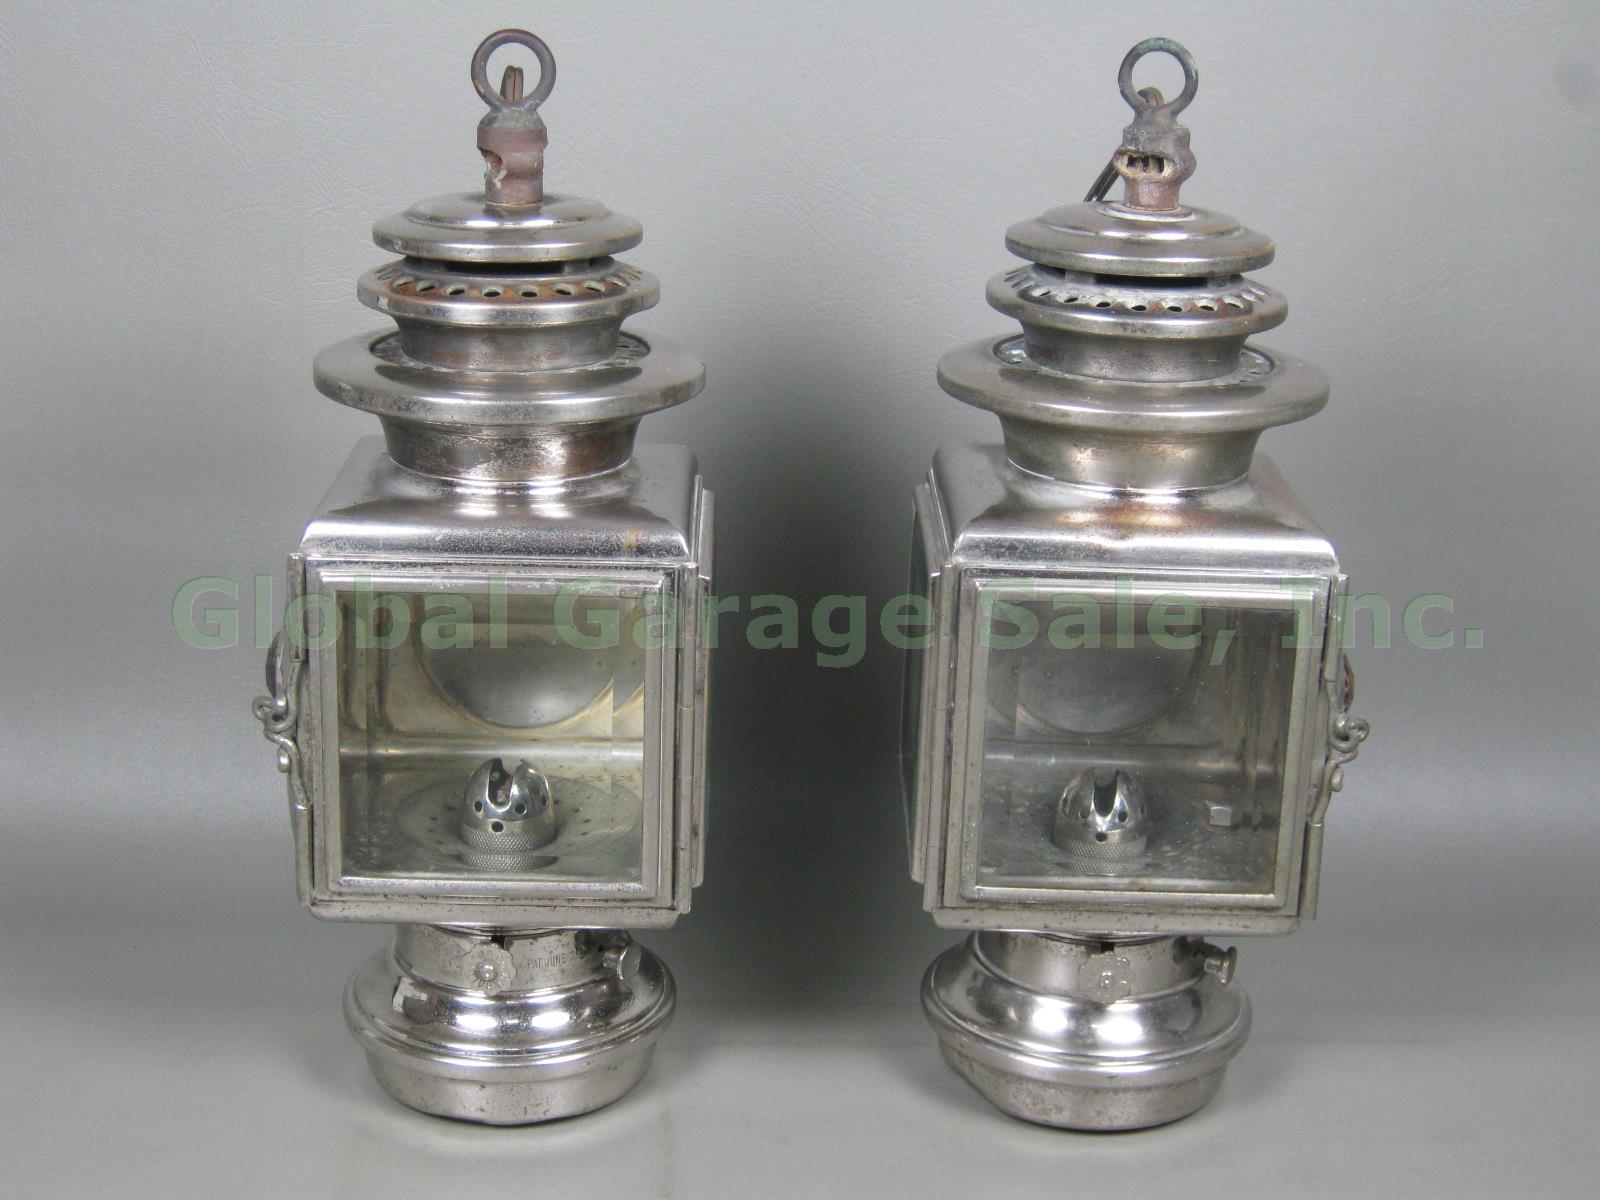 2 Antique CM Hall Carriage Headlights Lights Lamps Nickel Plated Electrified NR!